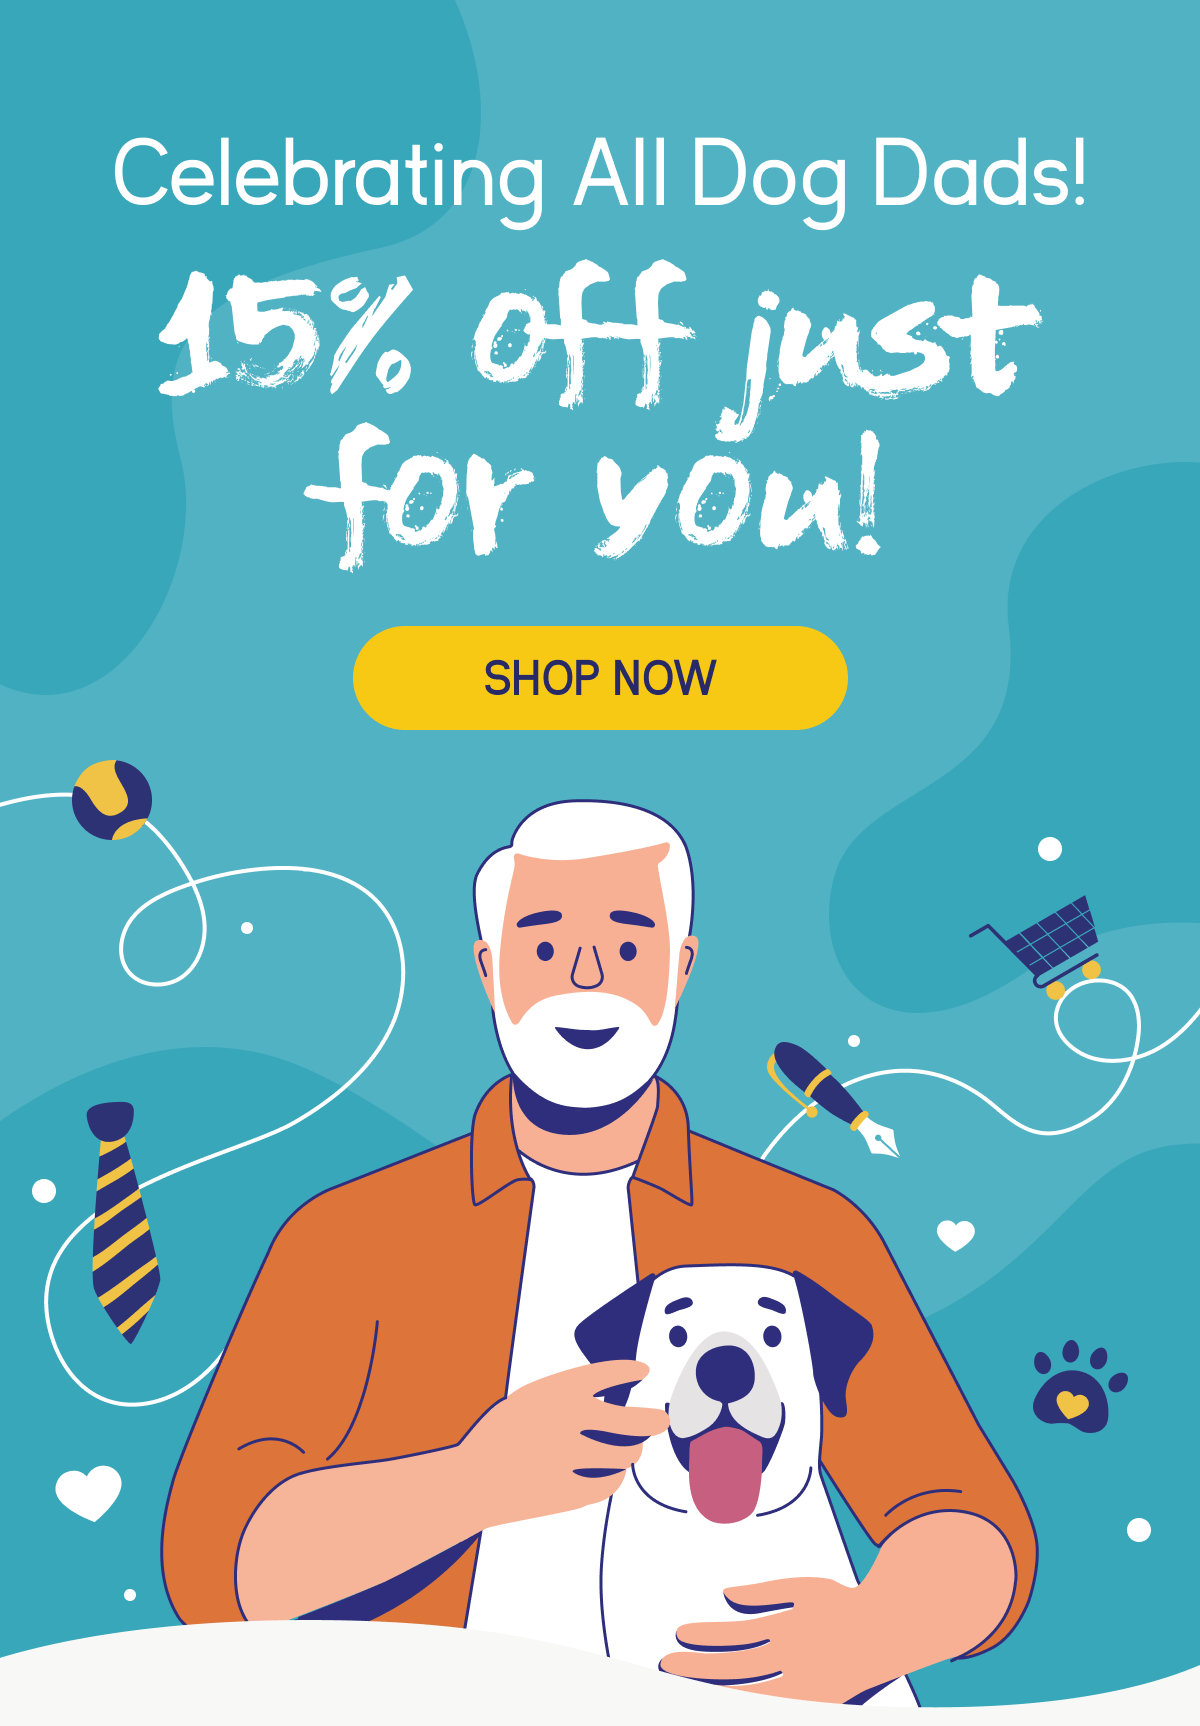 Celebrating All Dog Dads with 15% OFF!